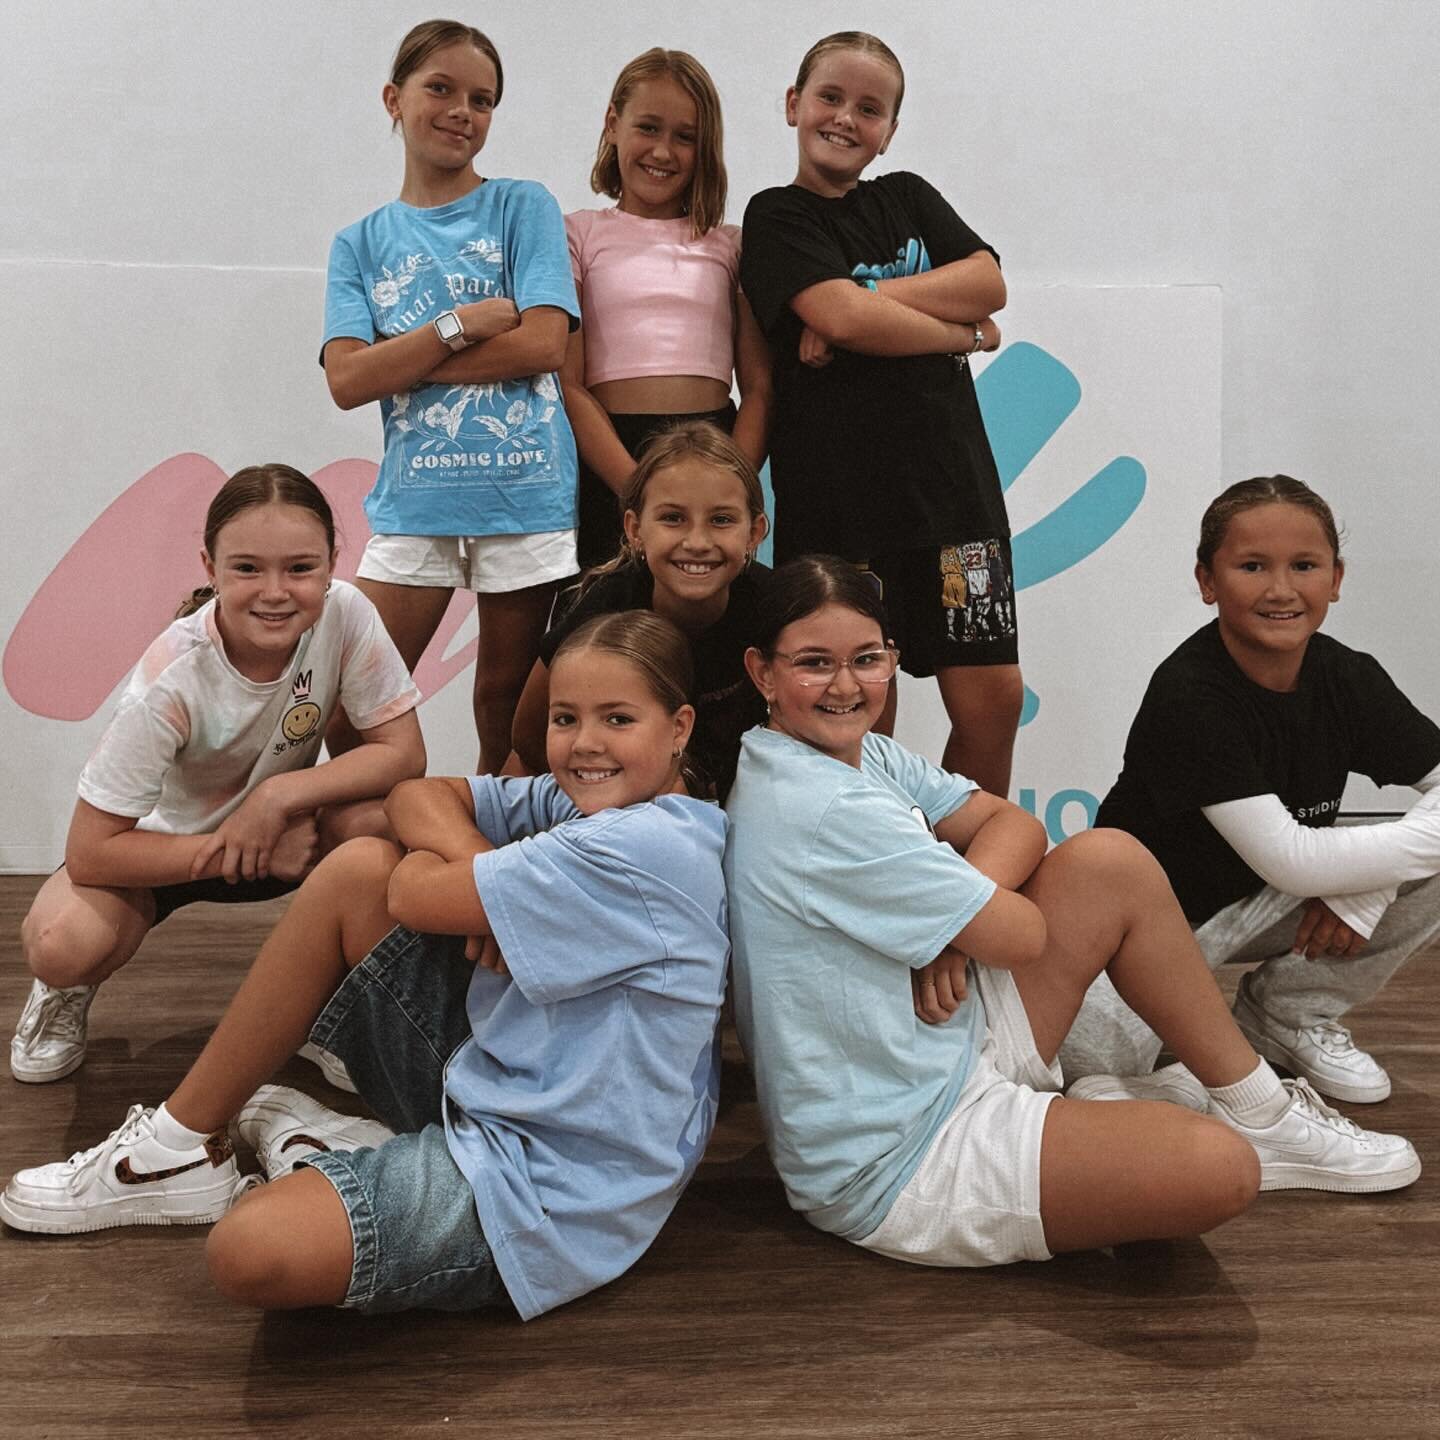 Introducing our 2024 Junior crew
MILKSHAKE 🍦🩵🩷💜🥤

They may look cute but they mean business!
We are so excited to watch their continued growth with you this year @georgie.price !! 🥛